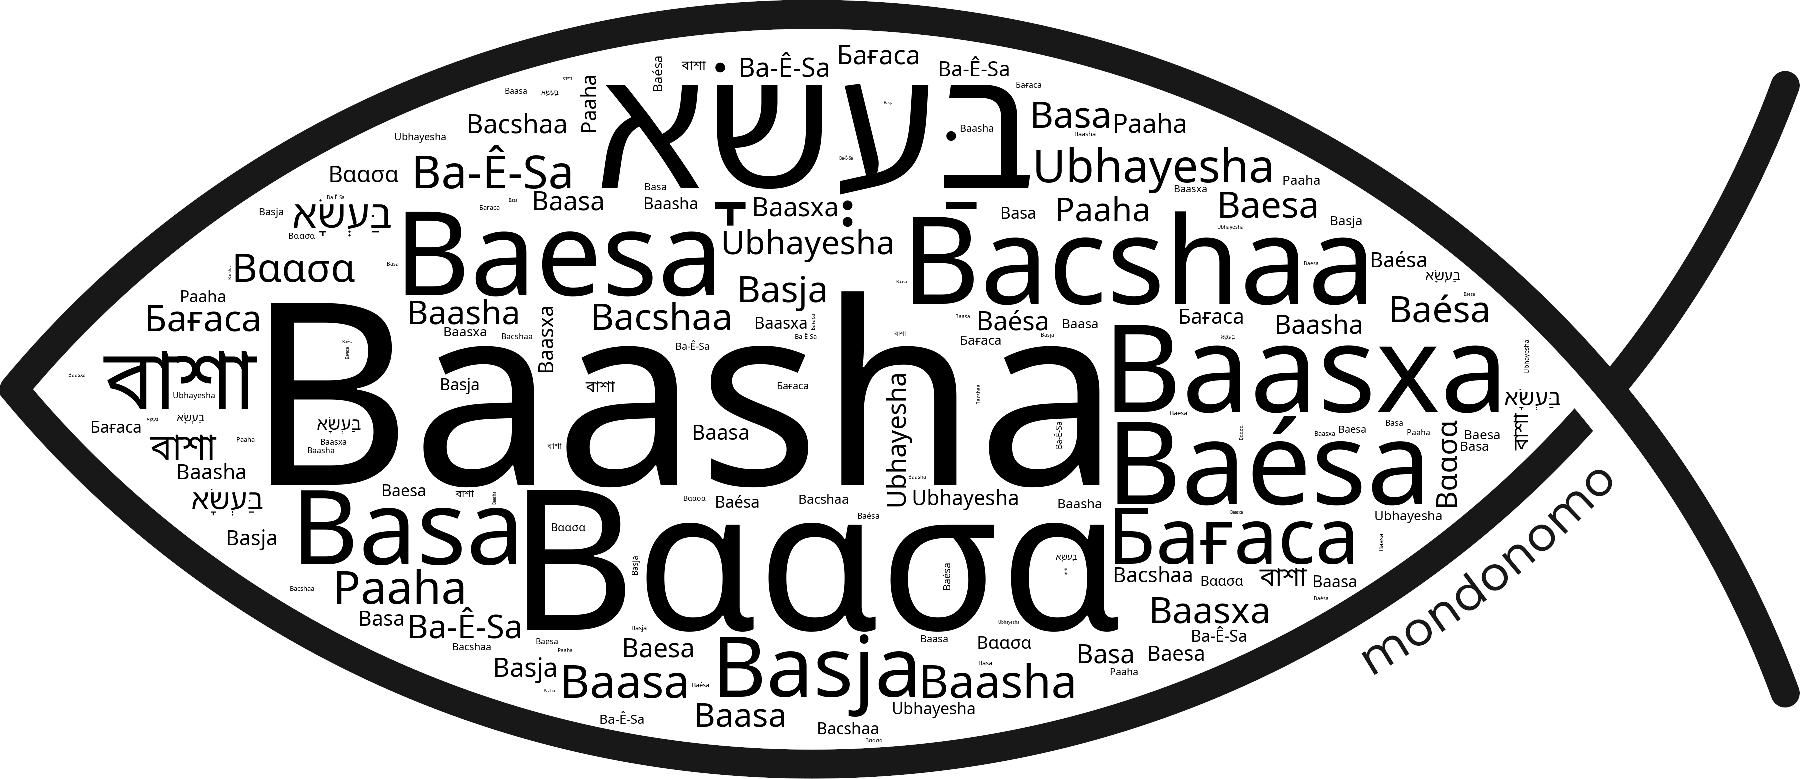 Name Baasha in the world's Bibles